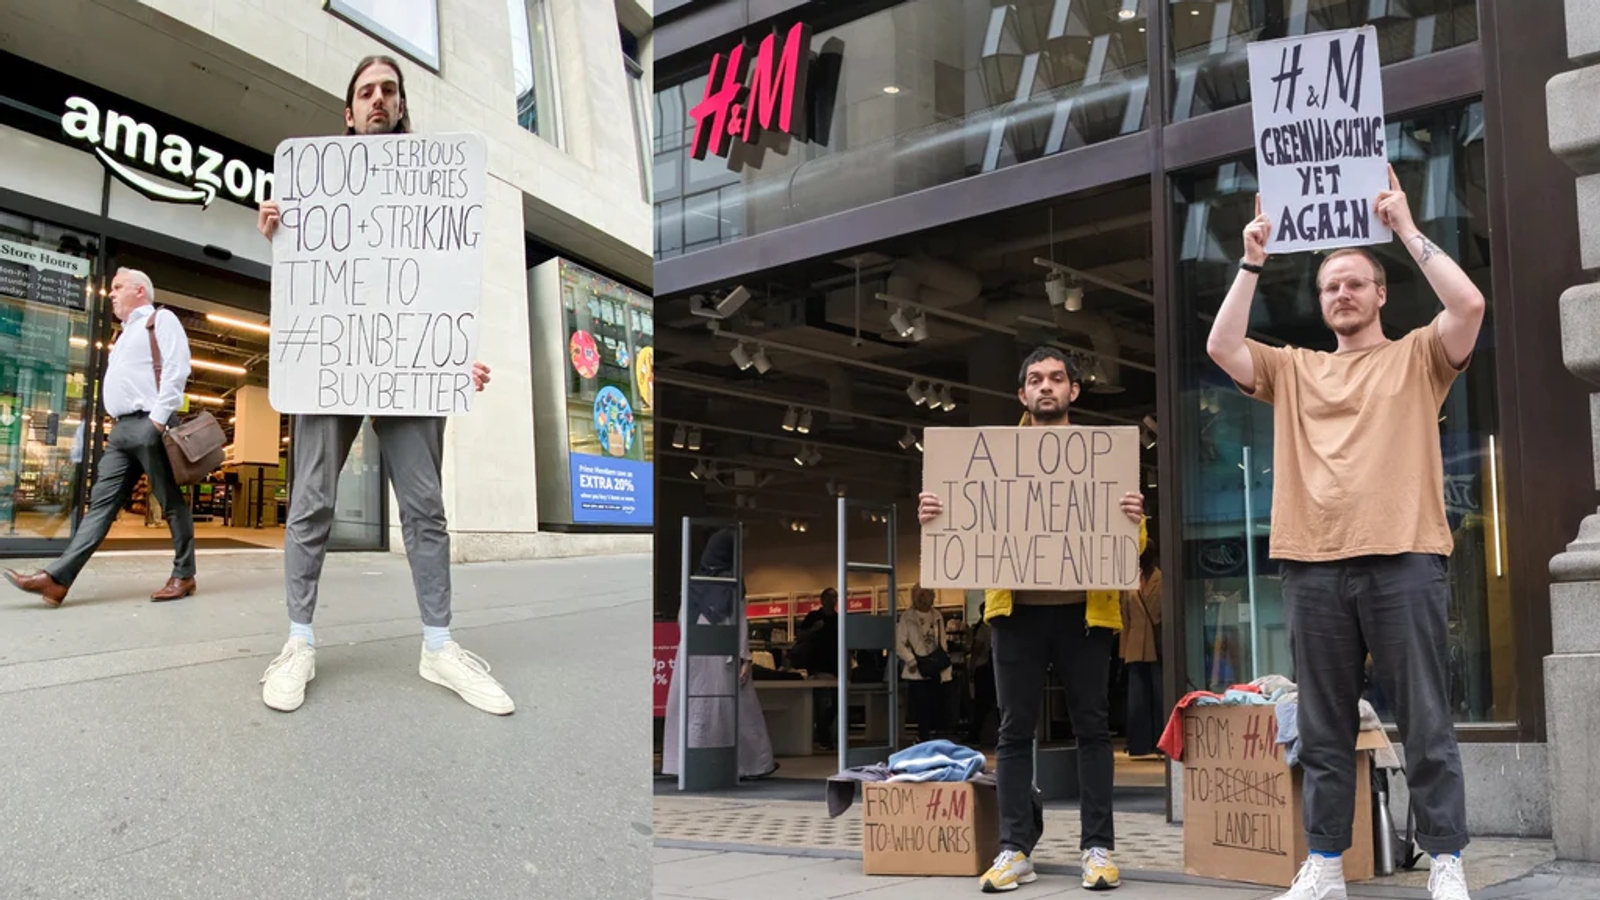 Two images showing people holding signs in front of Amazon and H&M stores